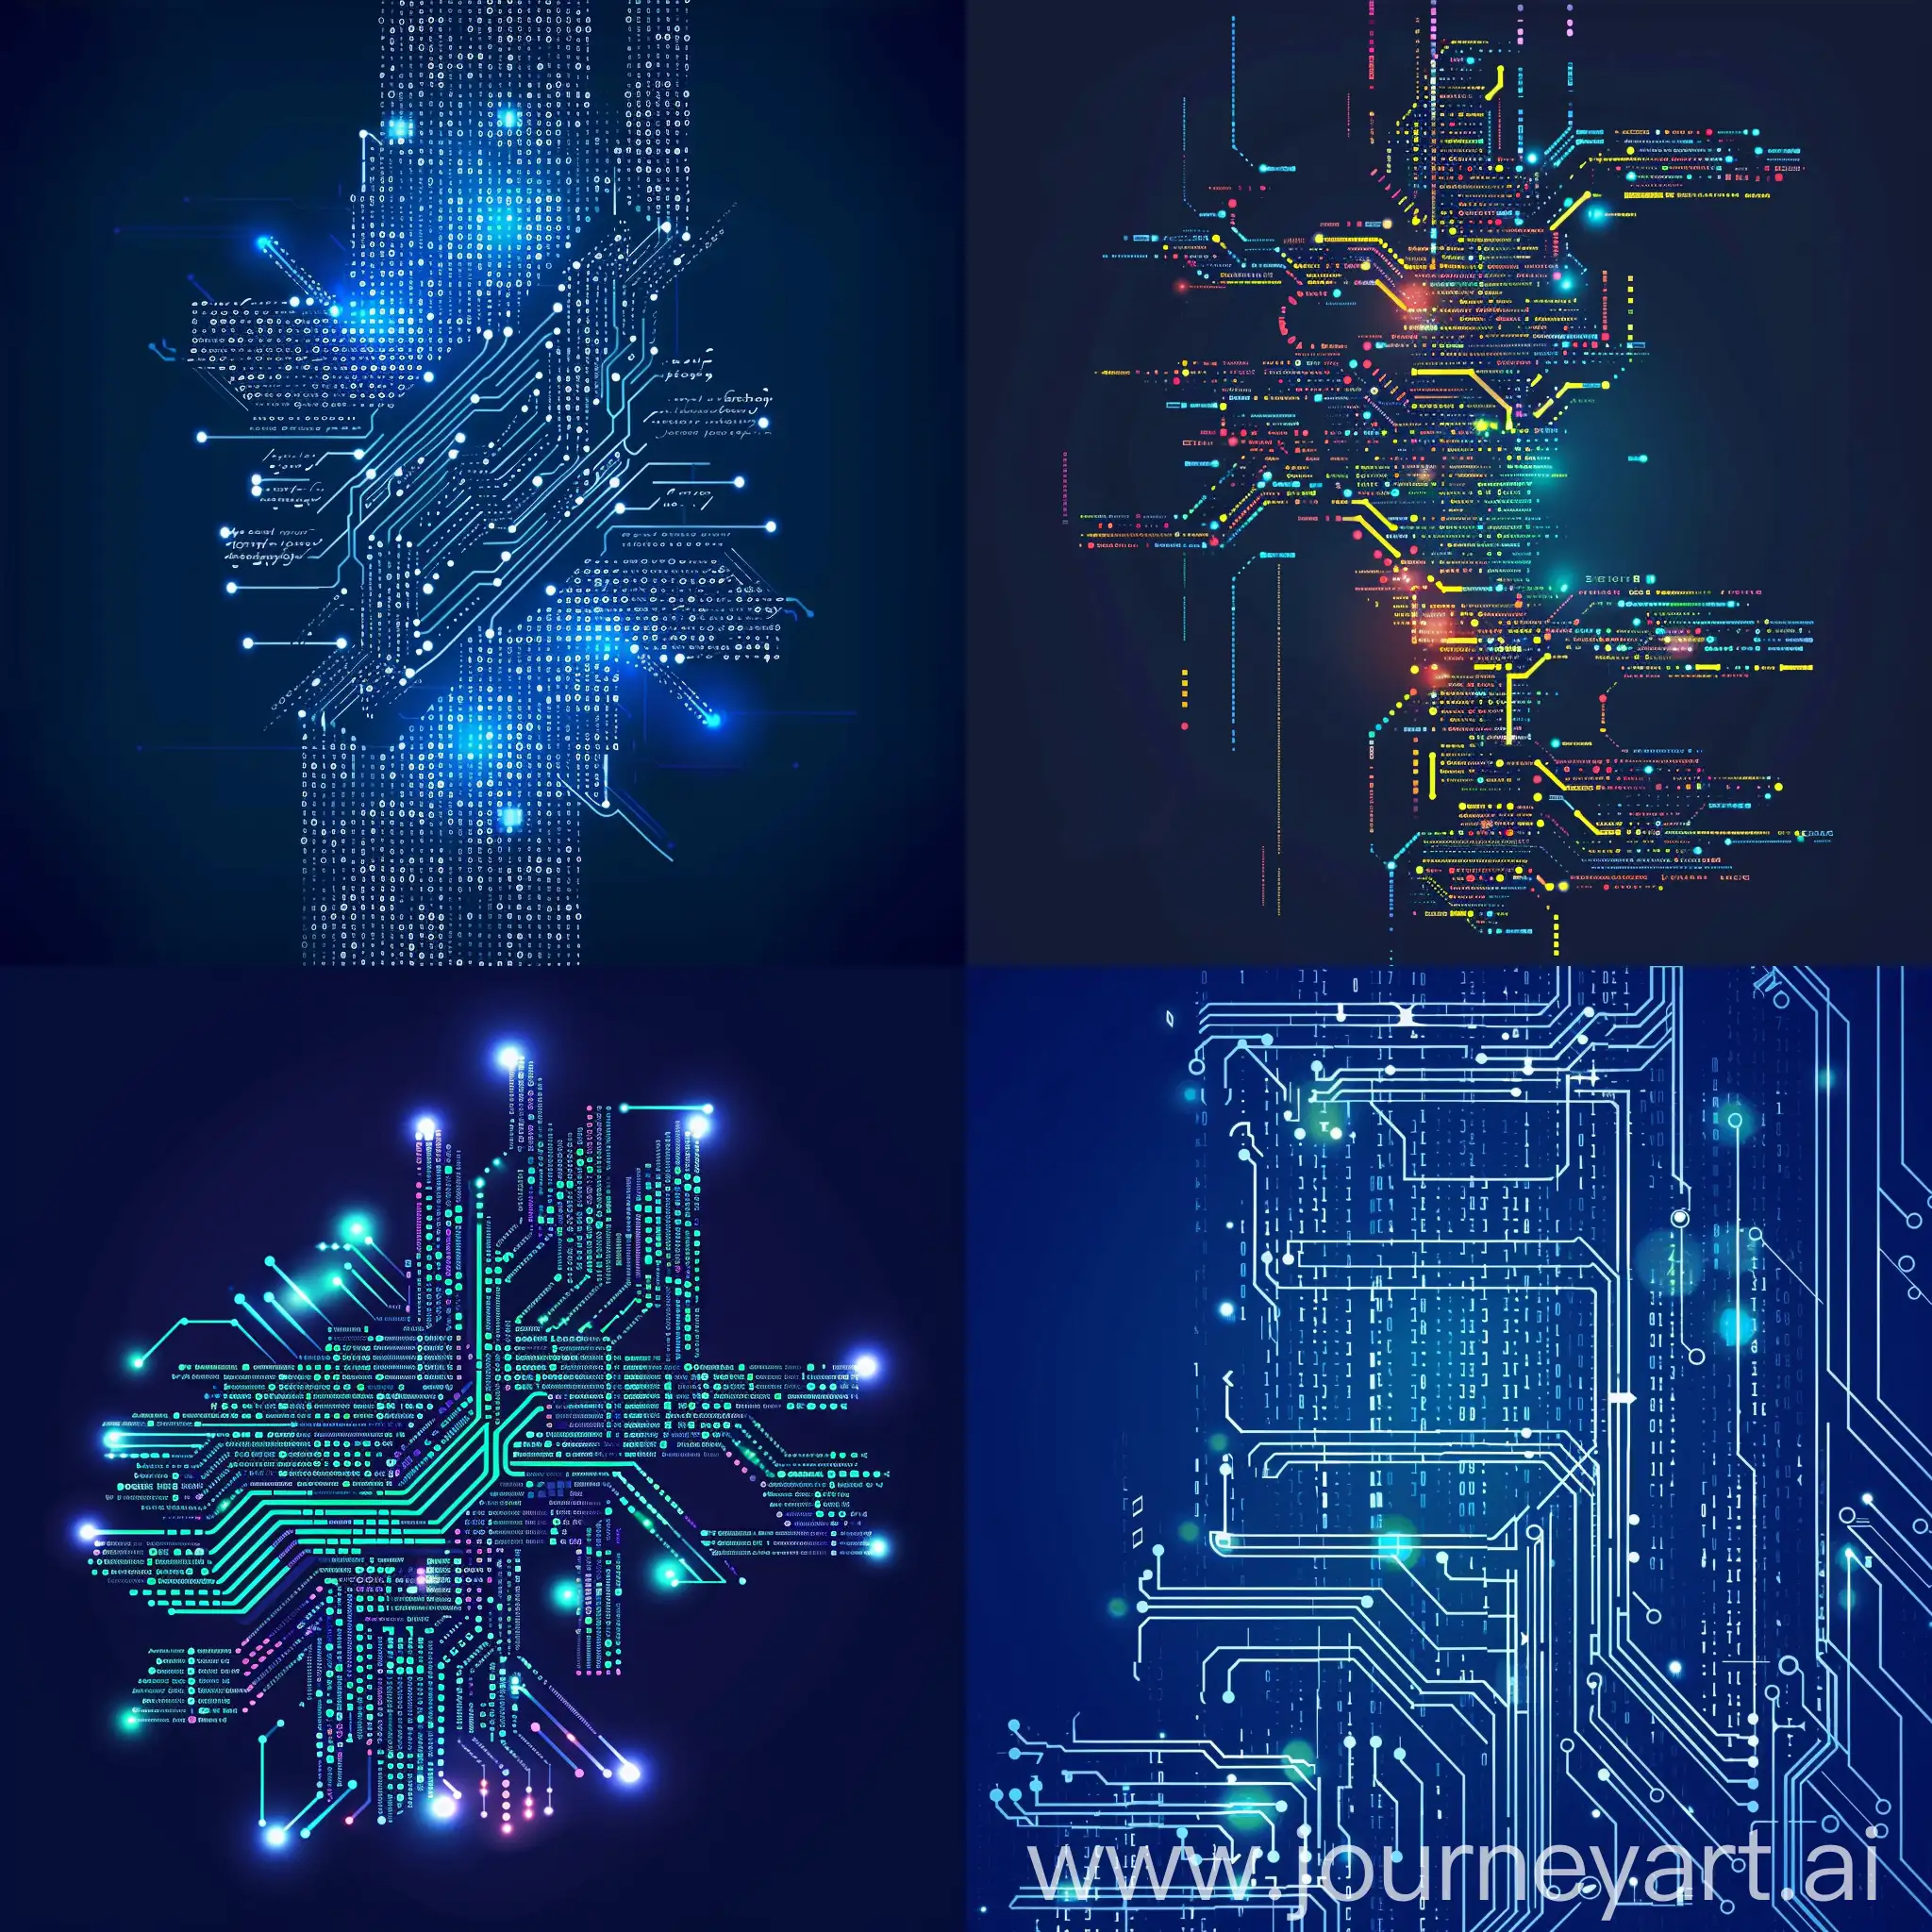 Textual-Computer-Circuit-Board-Symbol-on-Bright-Background